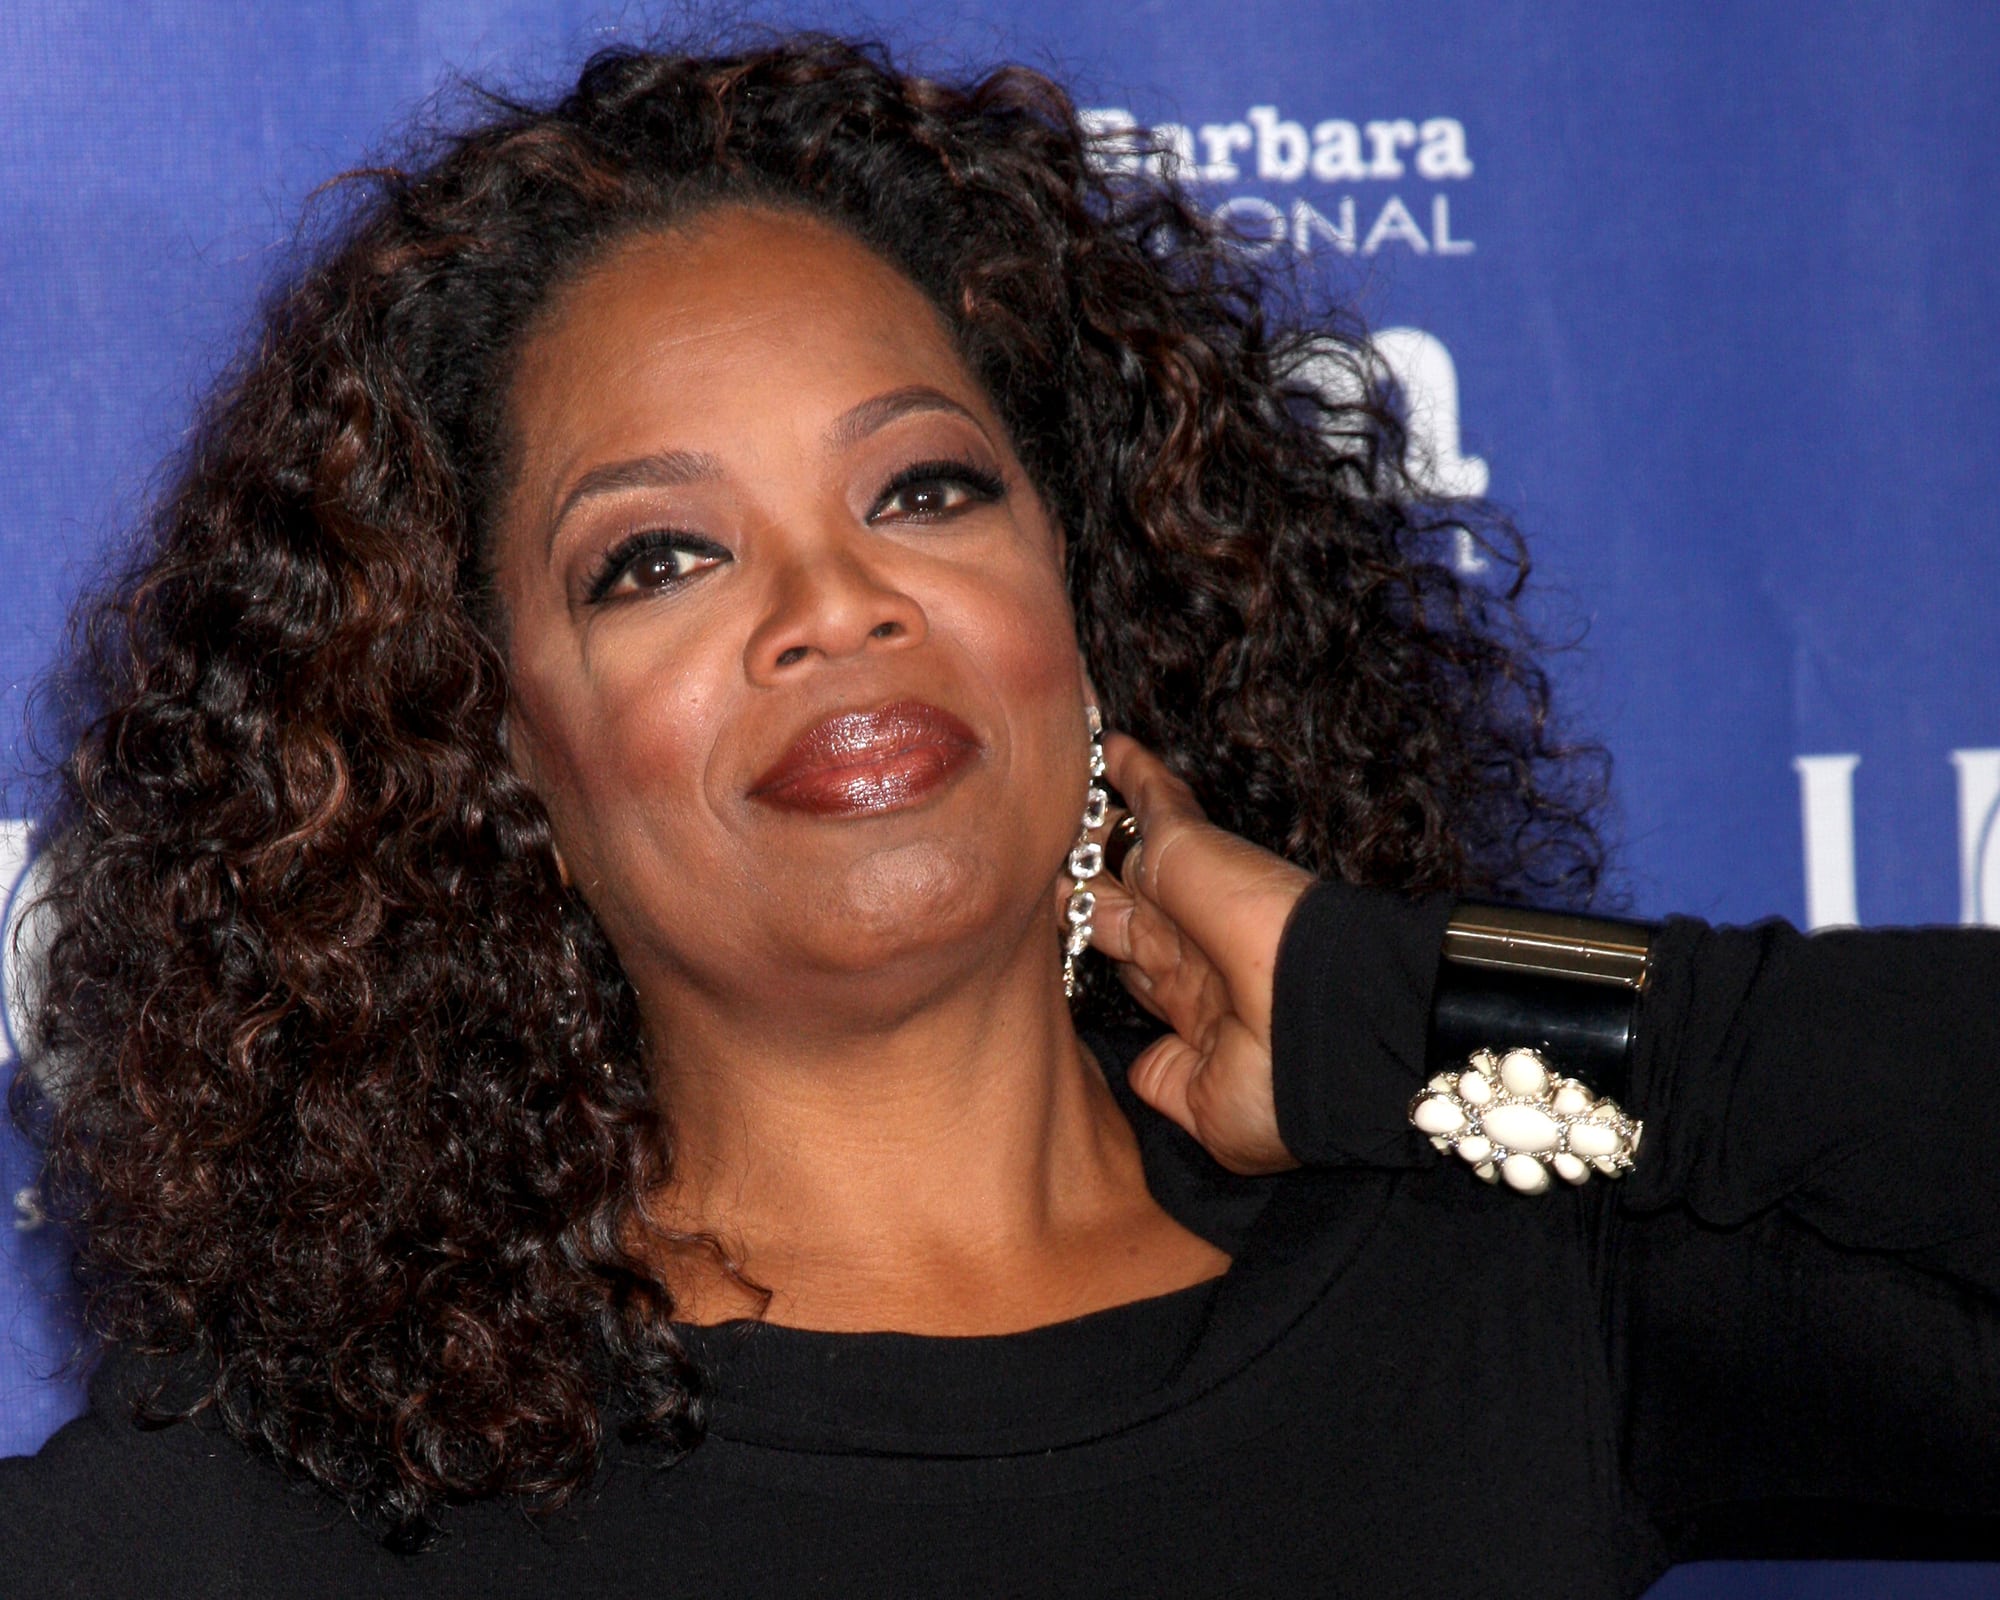 The 5 Books of Oprah Winfrey You Need To Read